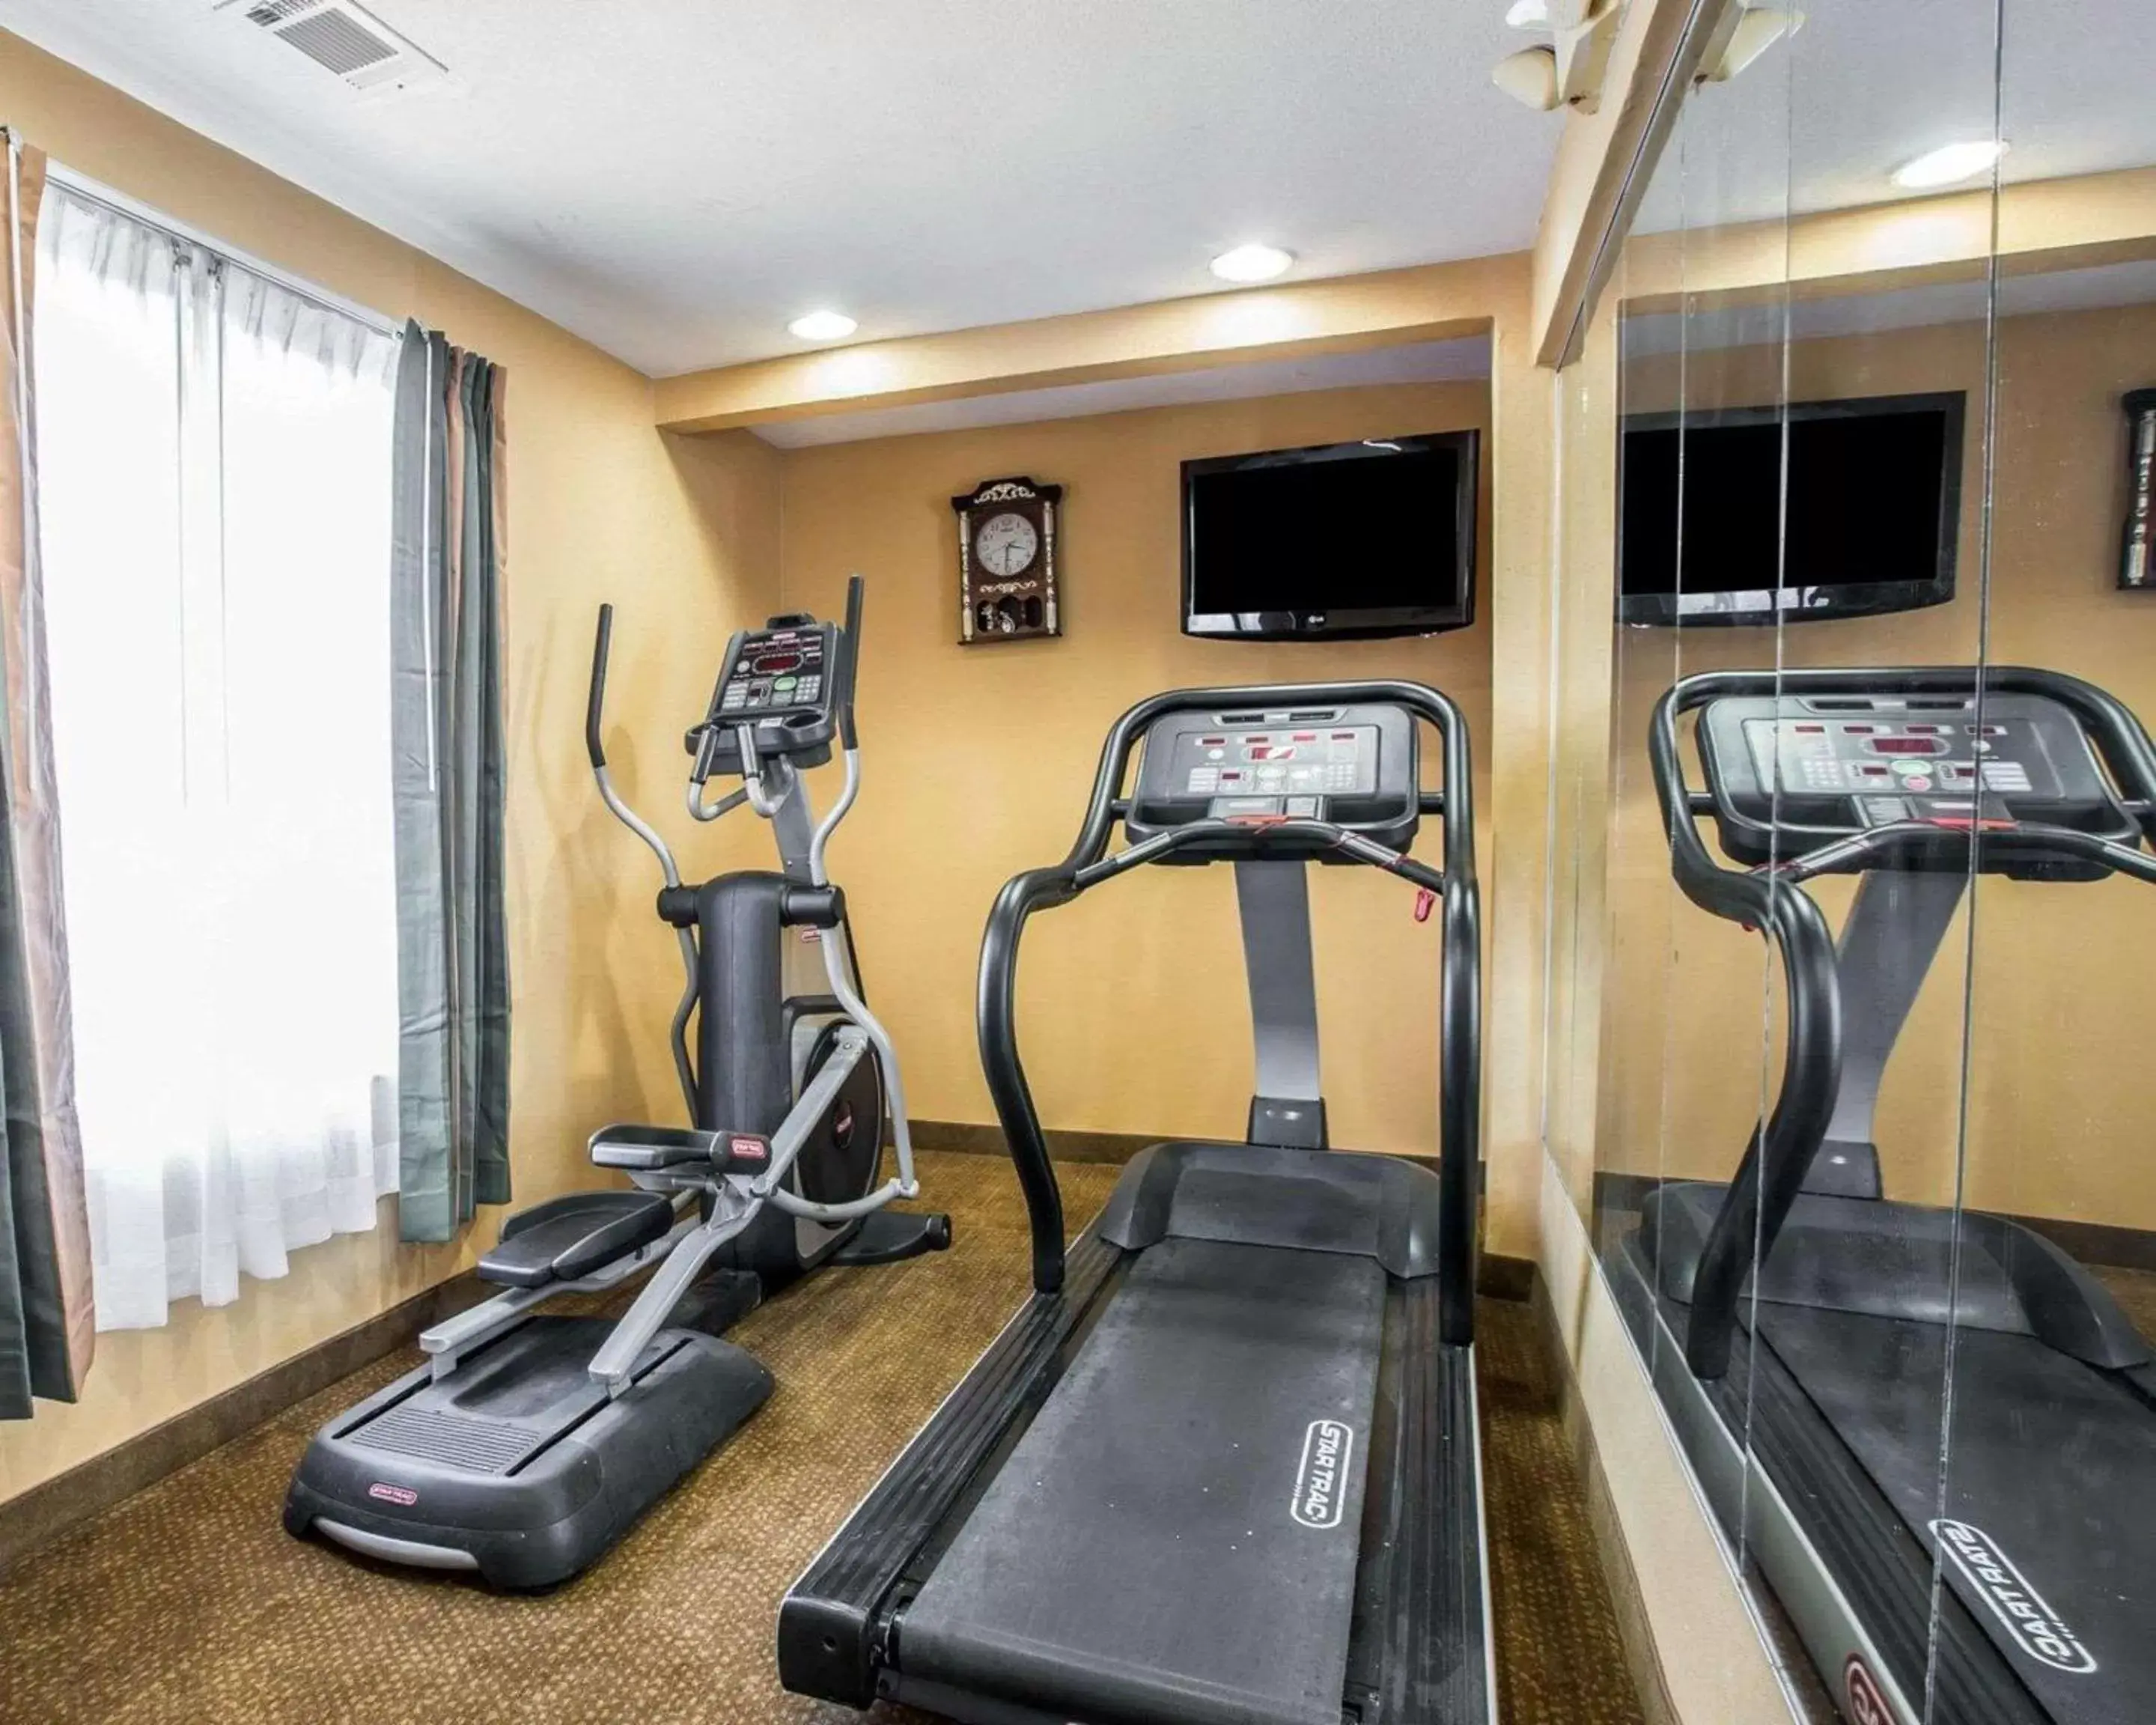 Fitness centre/facilities, Fitness Center/Facilities in Quality Inn Greenwood Hwy 25